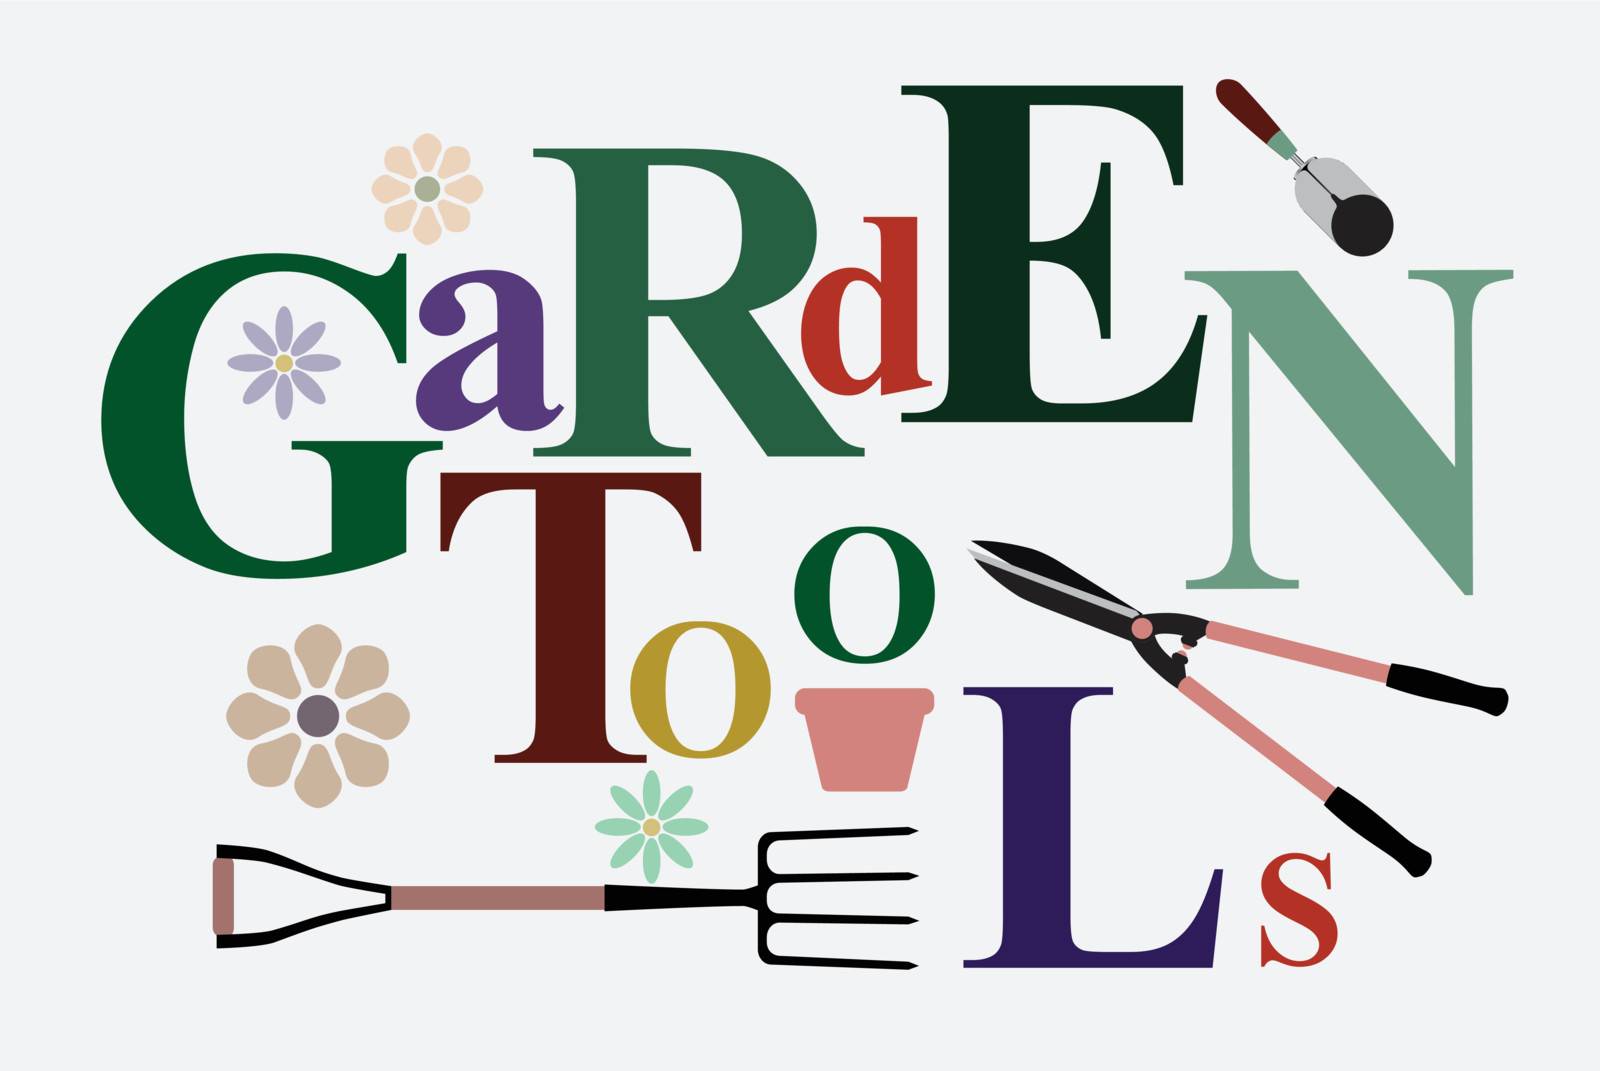 Garden tools text by VIPDesignUSA